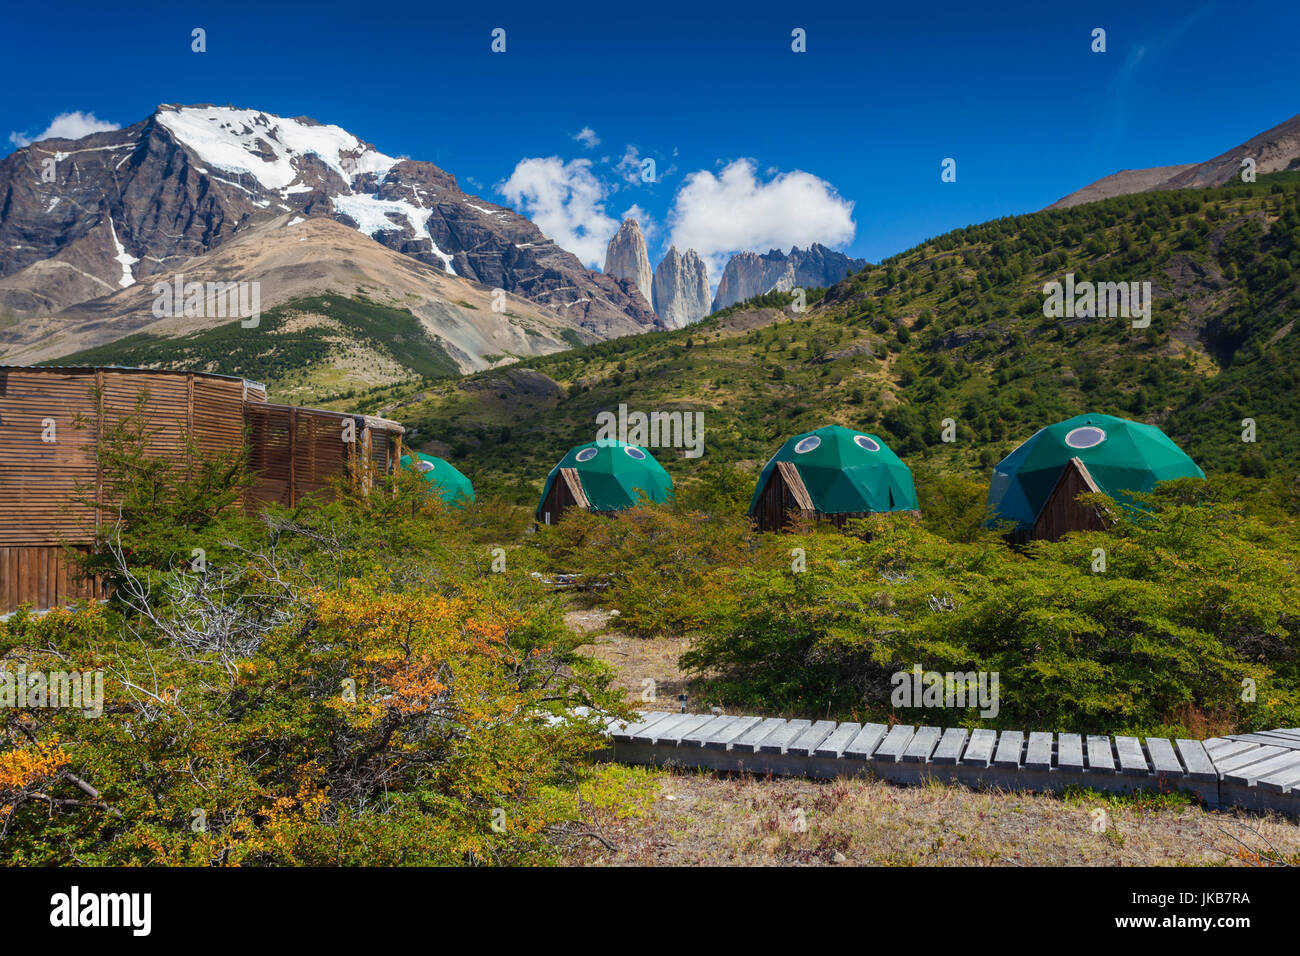 Chile, Magallanes Region, Torres del Paine National Park, Hotel Las Torres  area, refugio hiking huts Stock Photo - Alamy